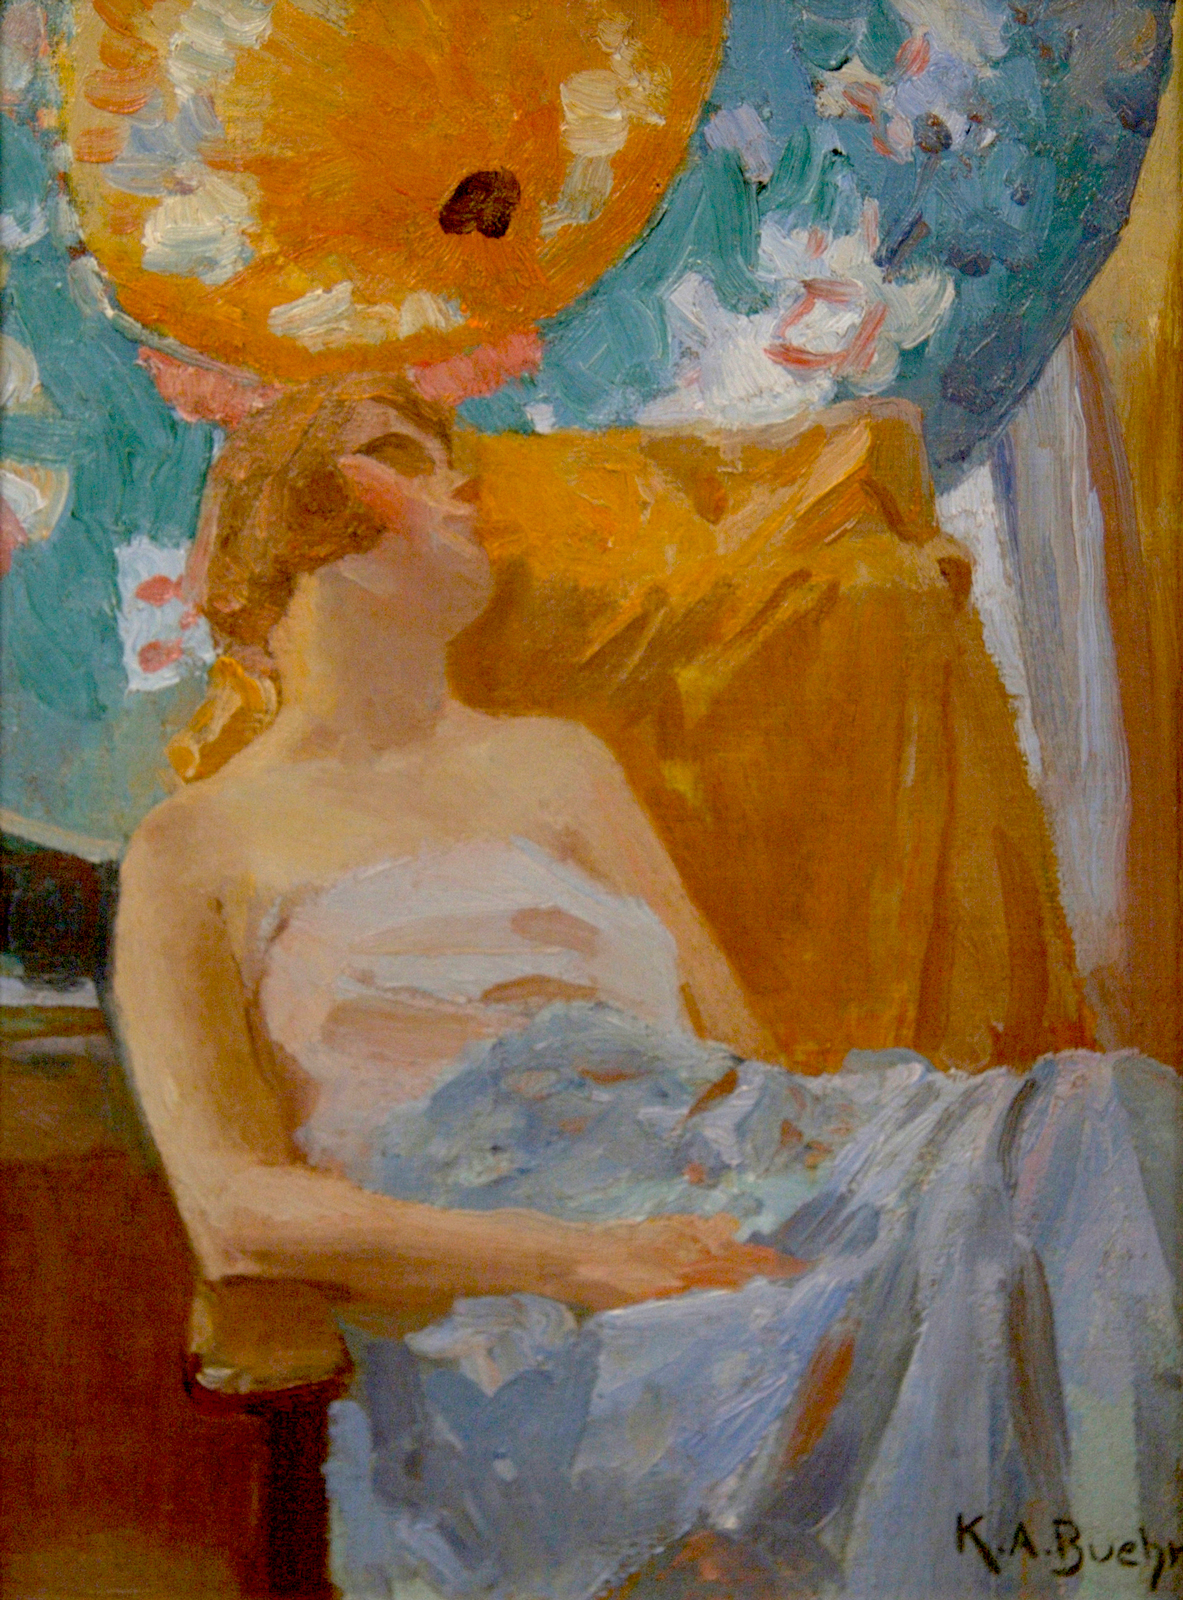 Woman with Parasols